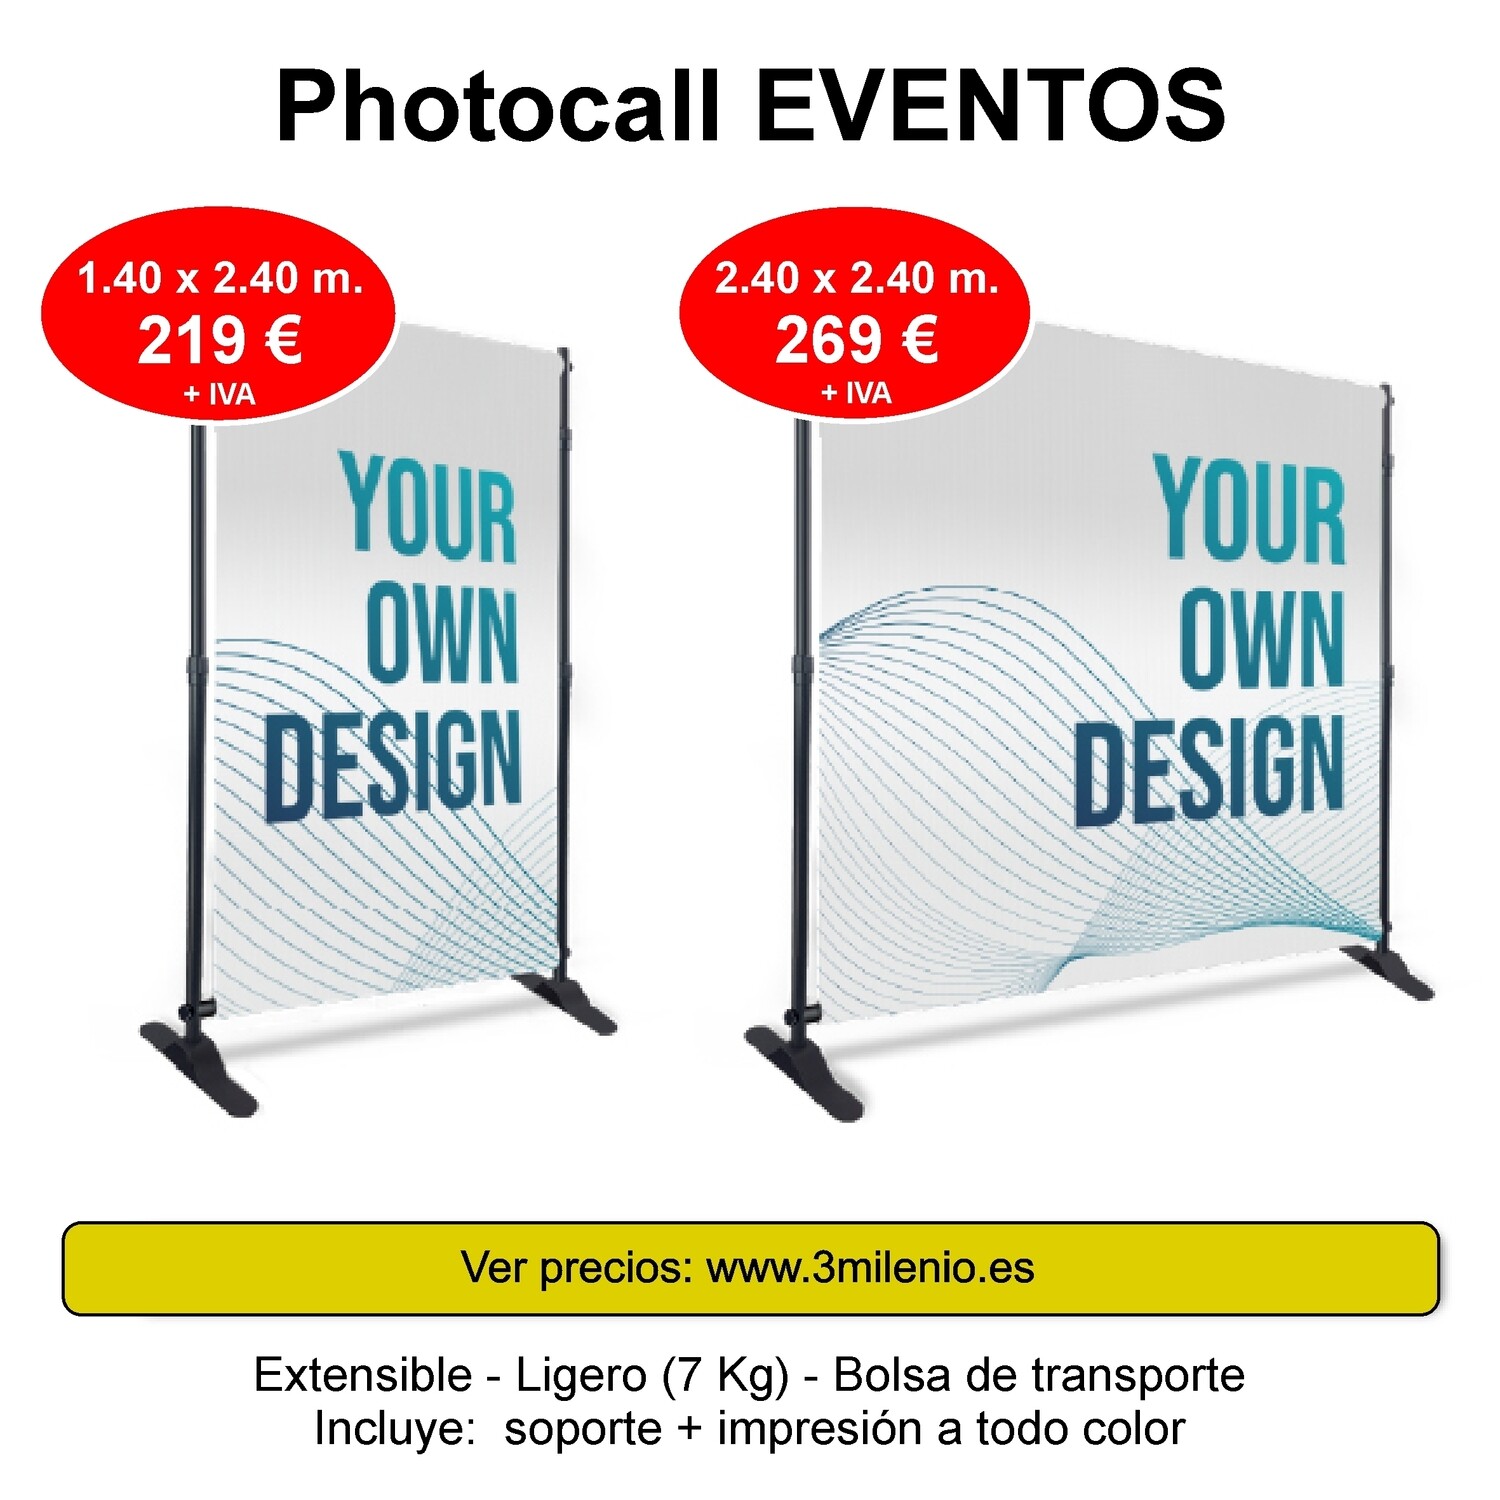 Photocall Extensible 2.40 x 2.40 m